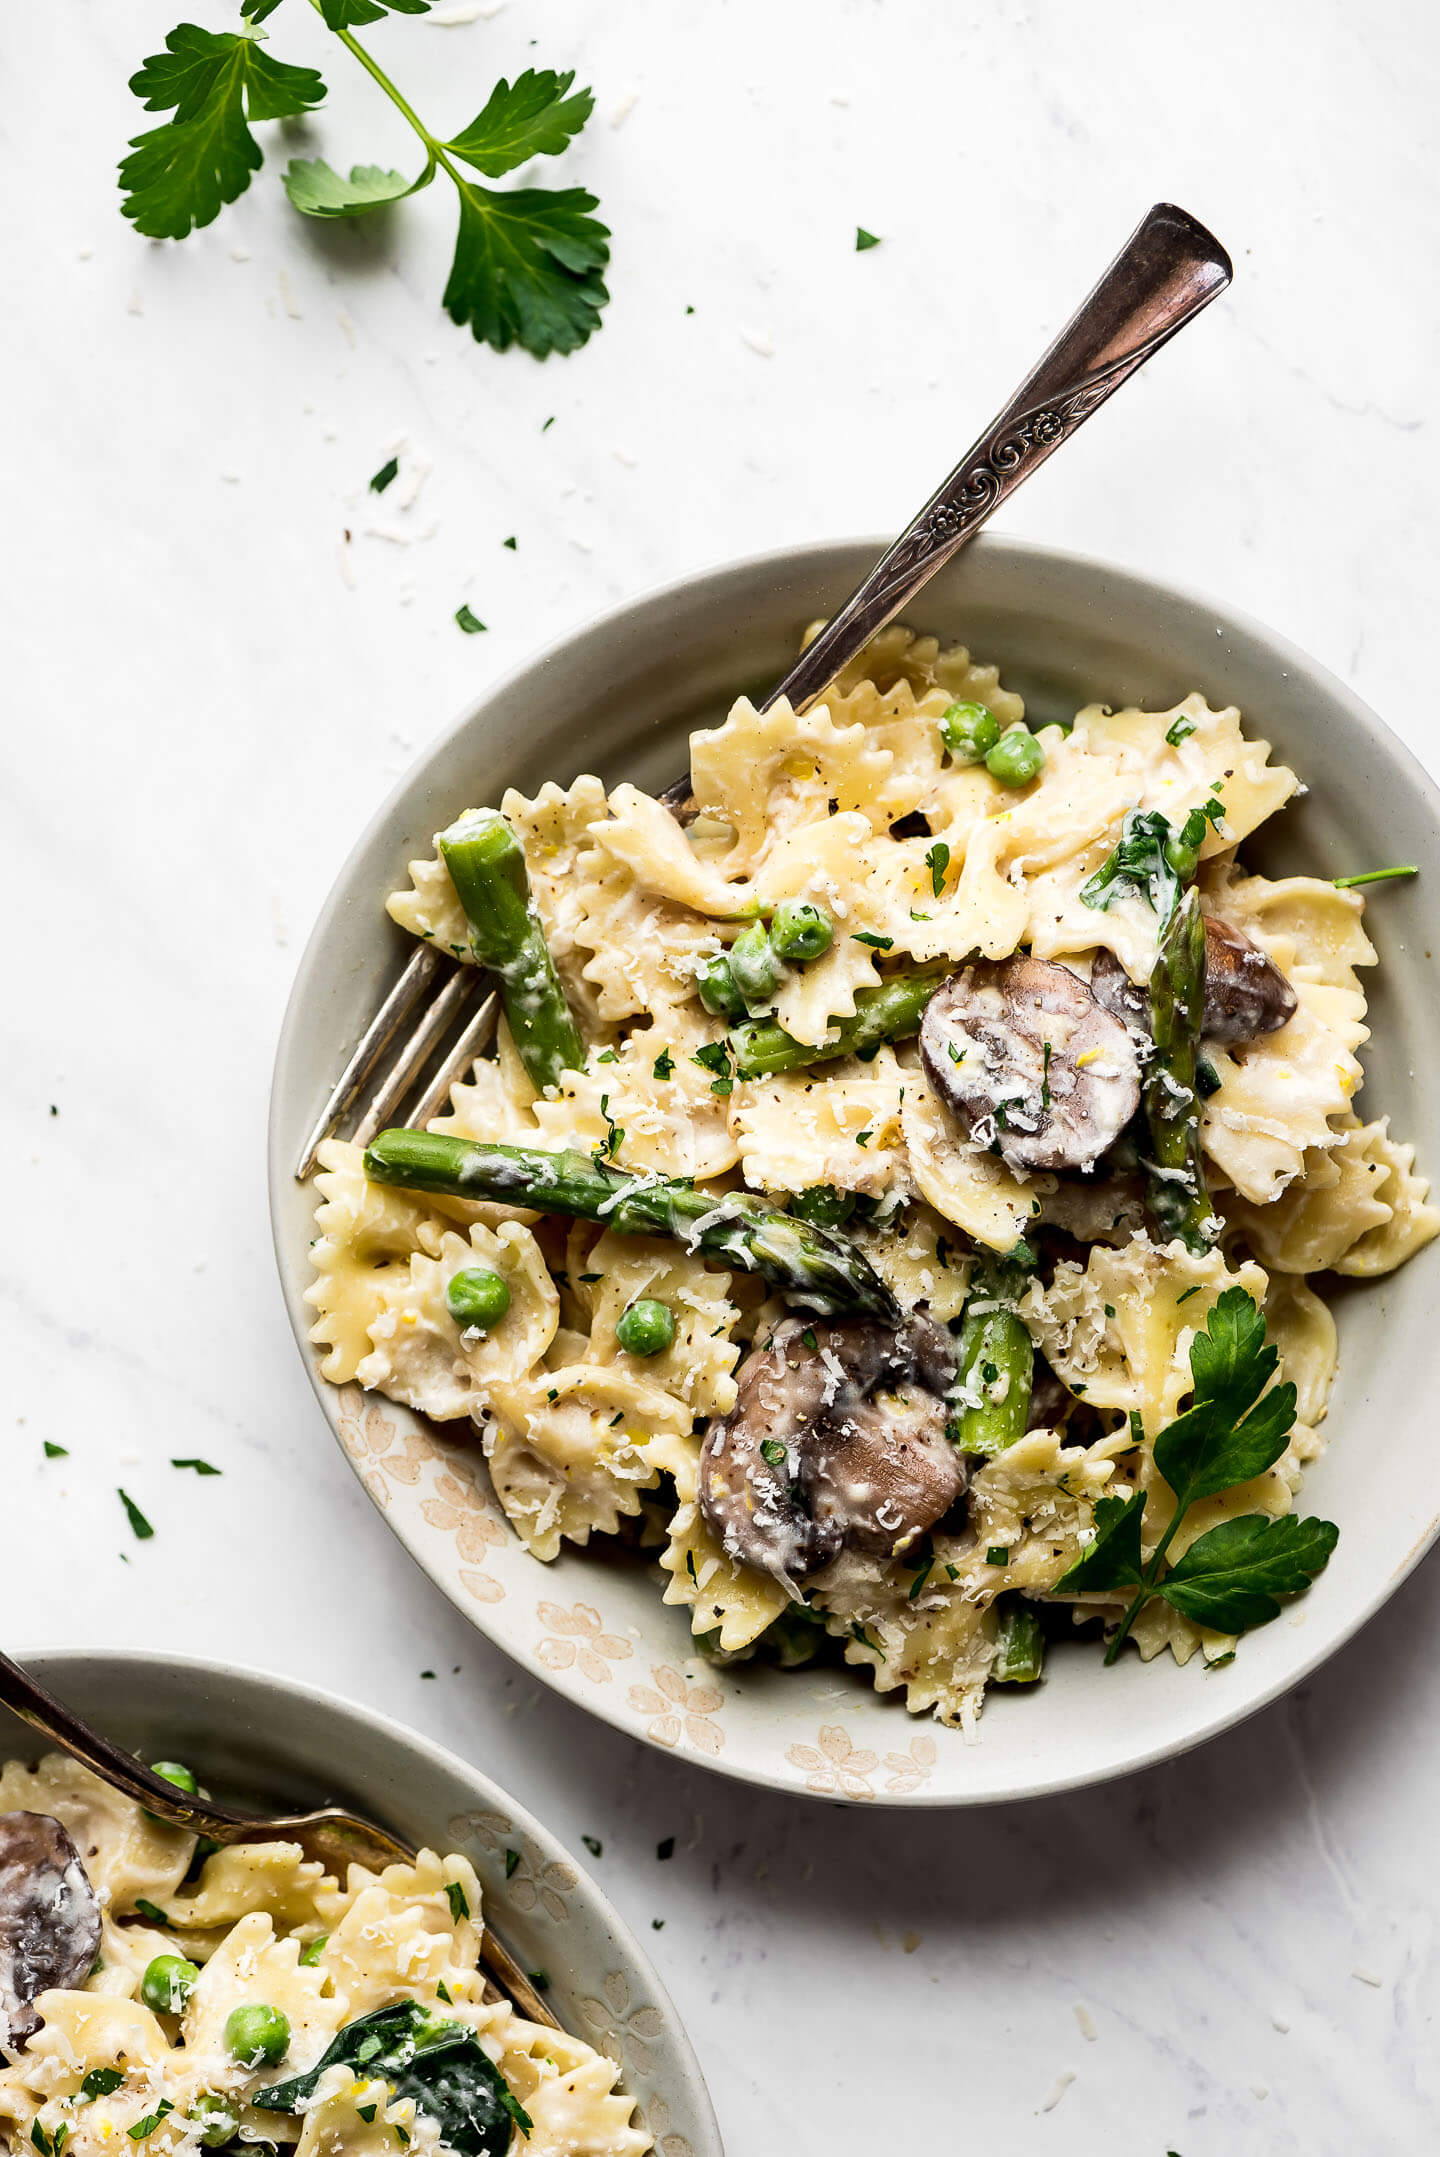 Two bowls of pasta with asparagus, mushrooms, peas and spinach.